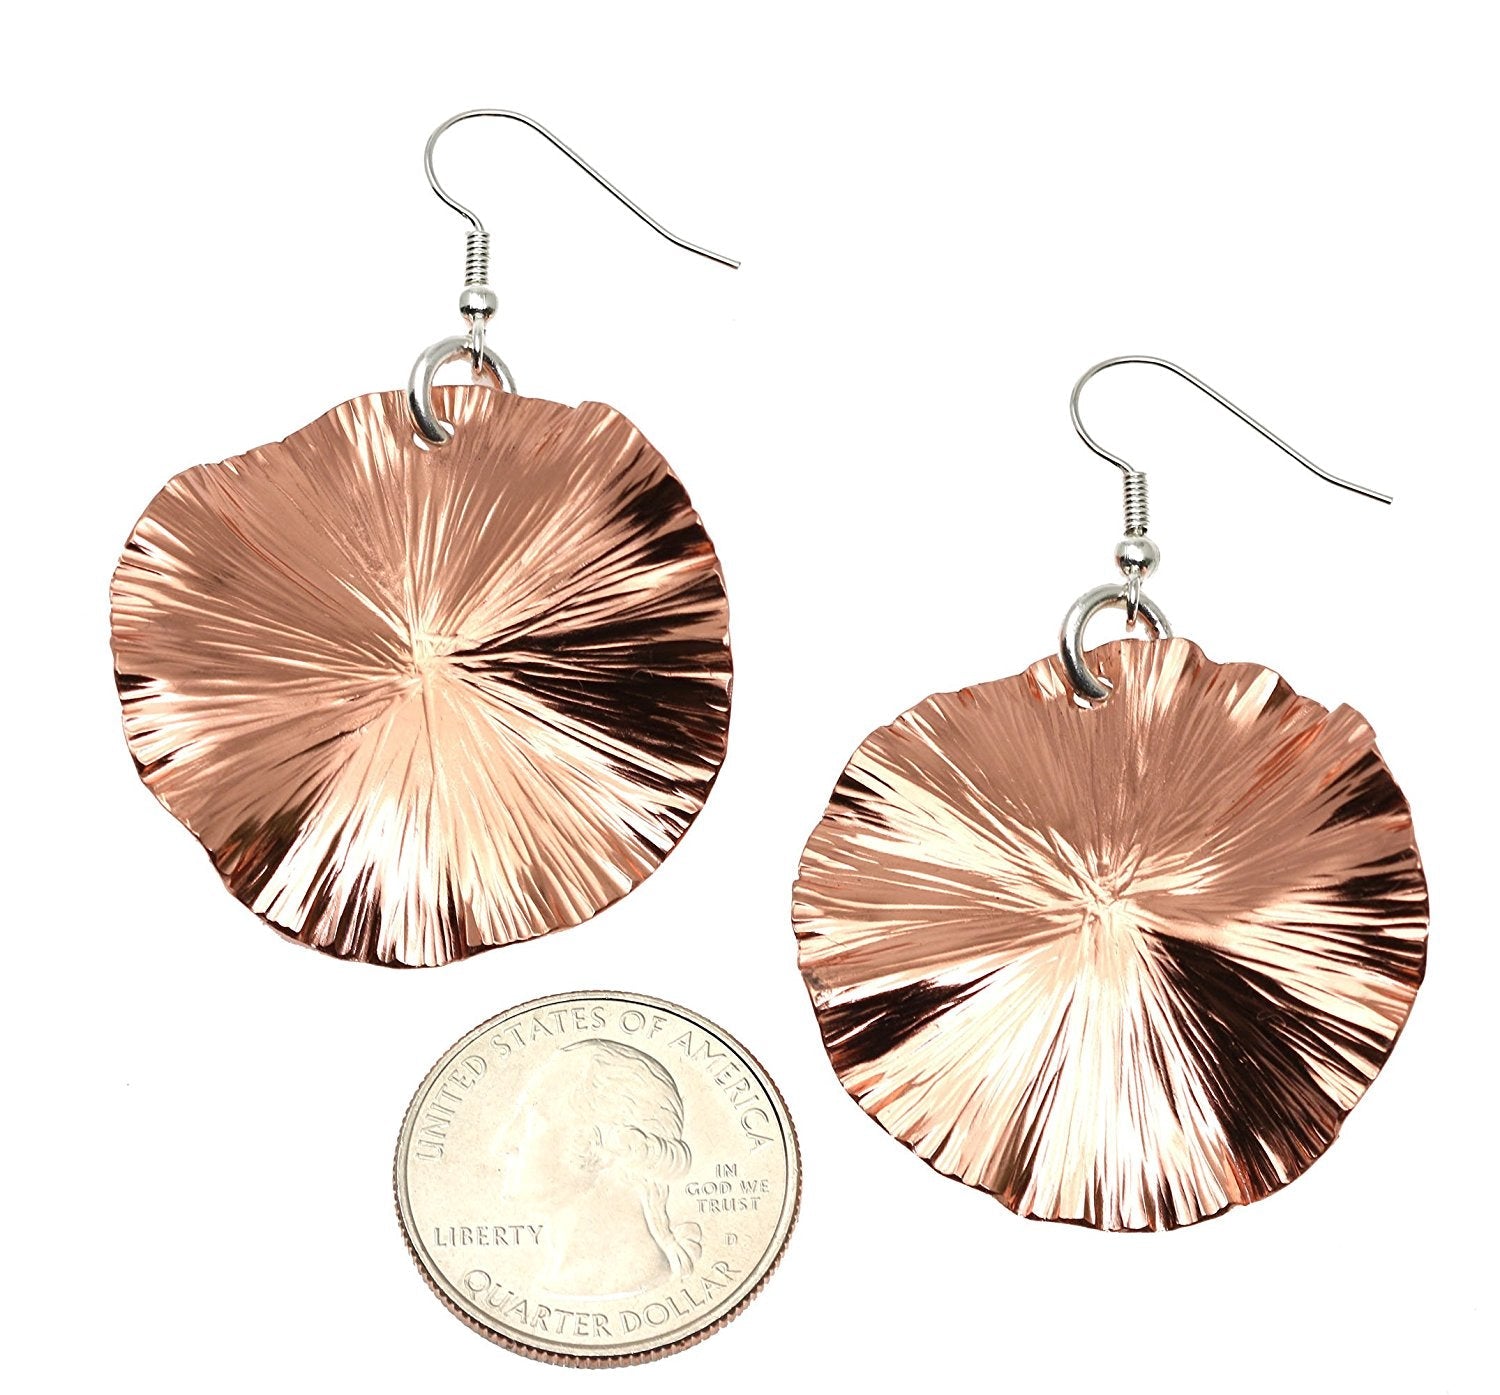 Size of Copper Lily Pad Earrings